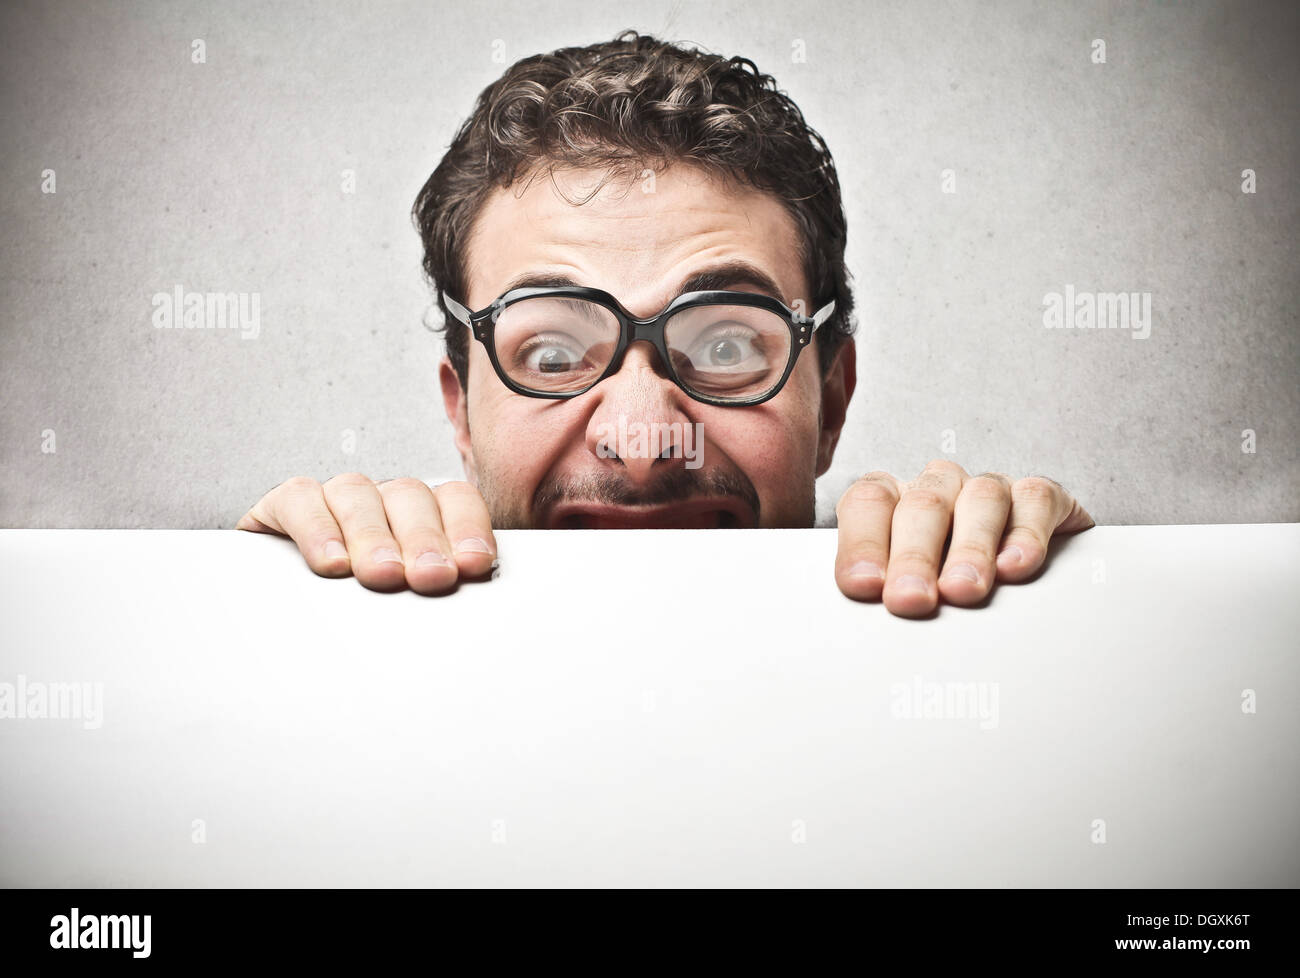 Man with glasses holding a cardboard Stock Photo